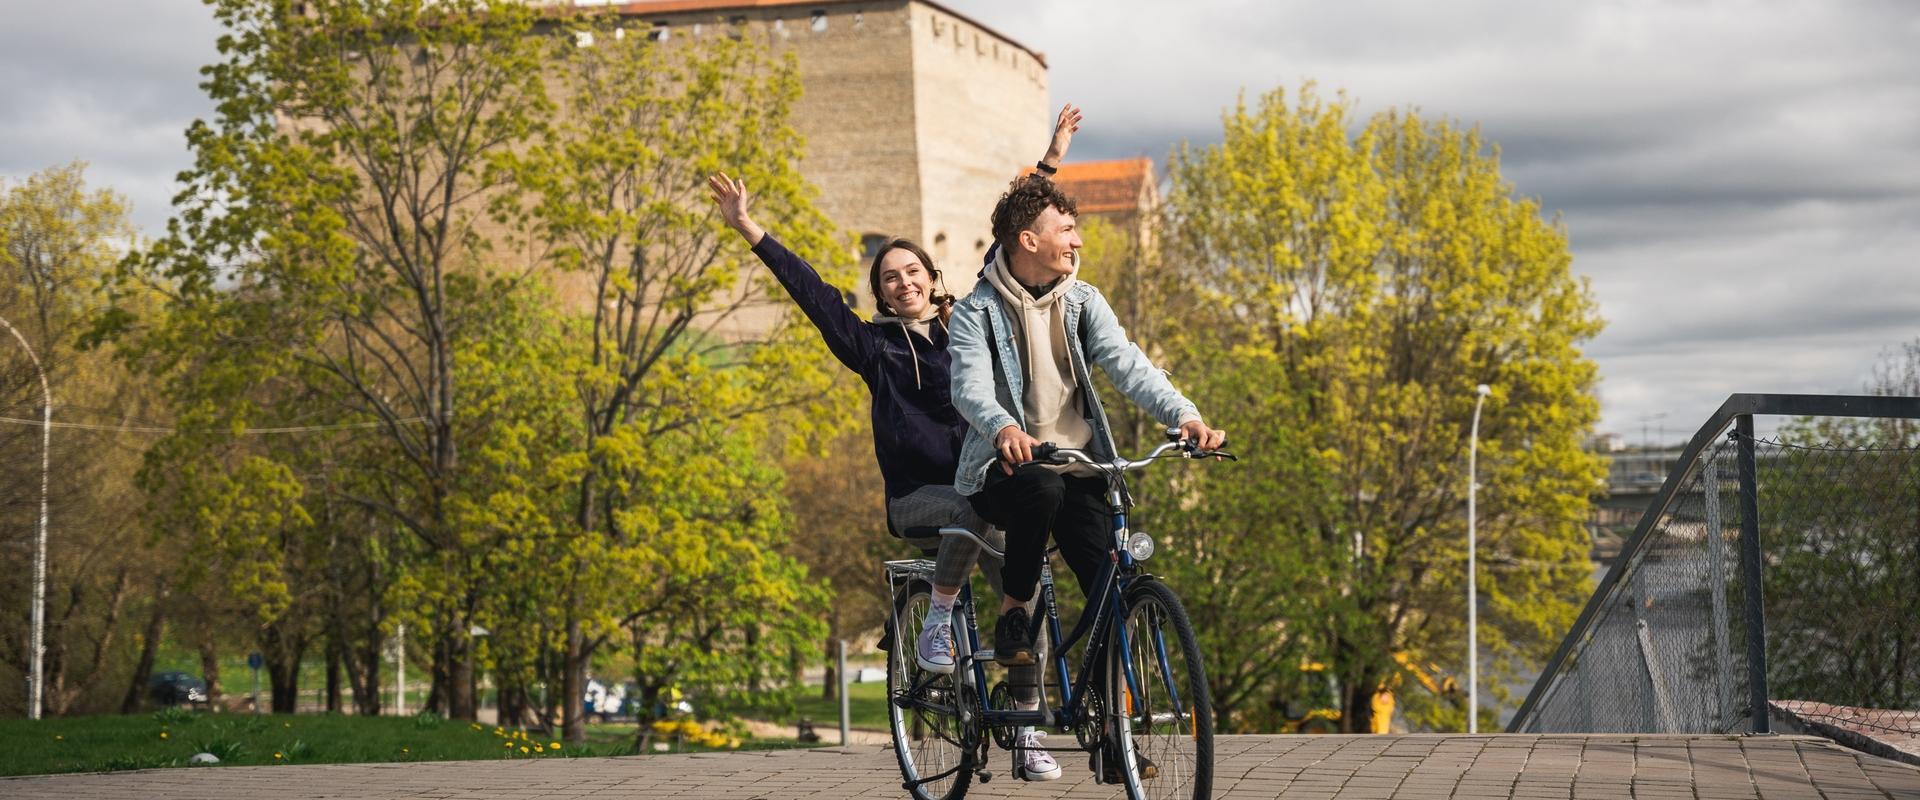 Come and explore the city of Narva and Ida-Viru County by bicycle! We have a bike that fits everyone, including both city and mountain bikes. There ar